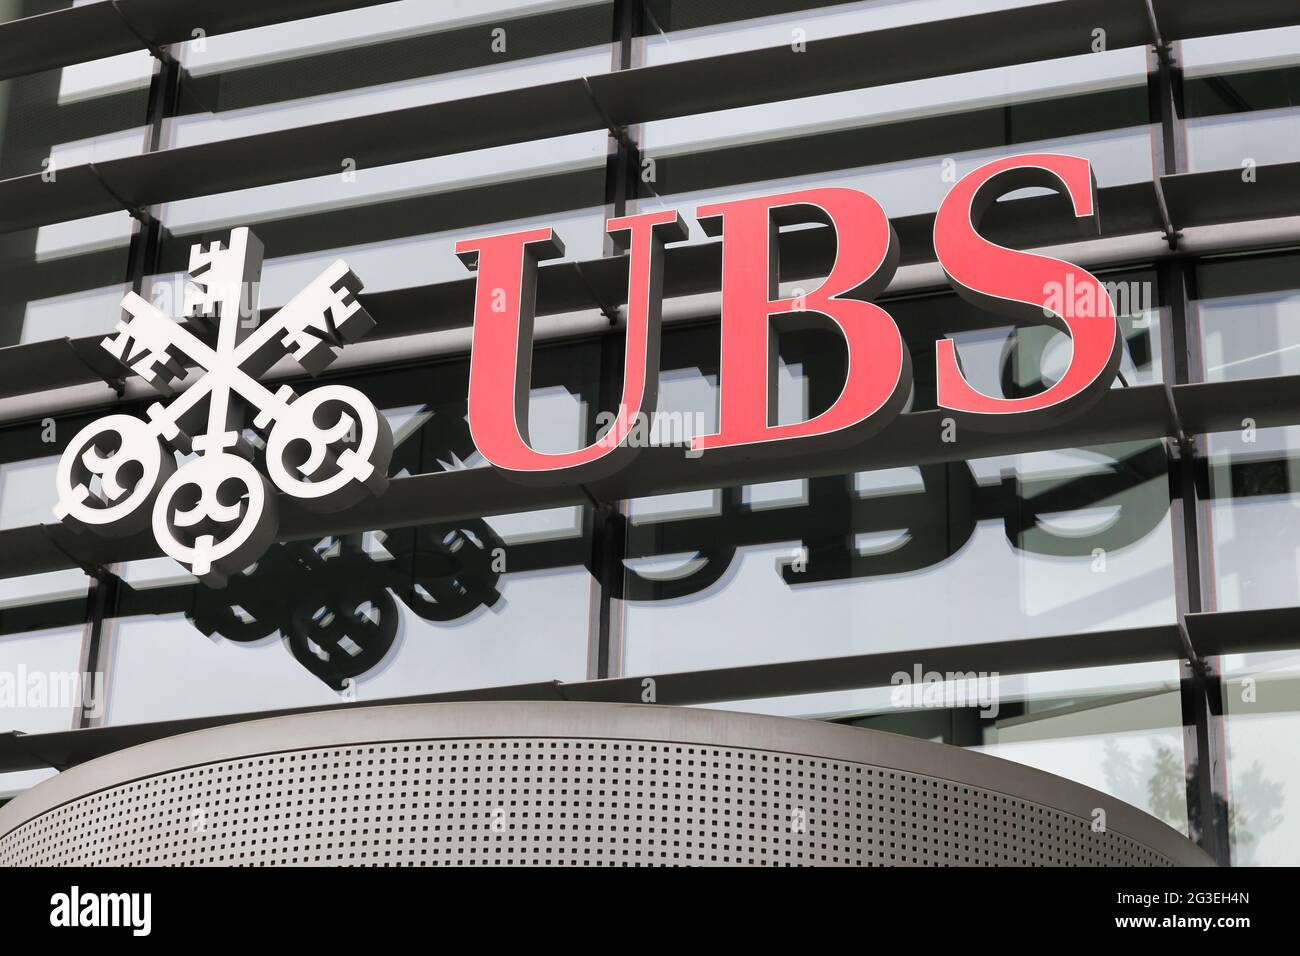 Kirchberg, Luxembourg - July 1, 2017: UBS sign on a wall. UBS is a Swiss global financial services company. UBS is the largest bank in Switzerland Stock Photo